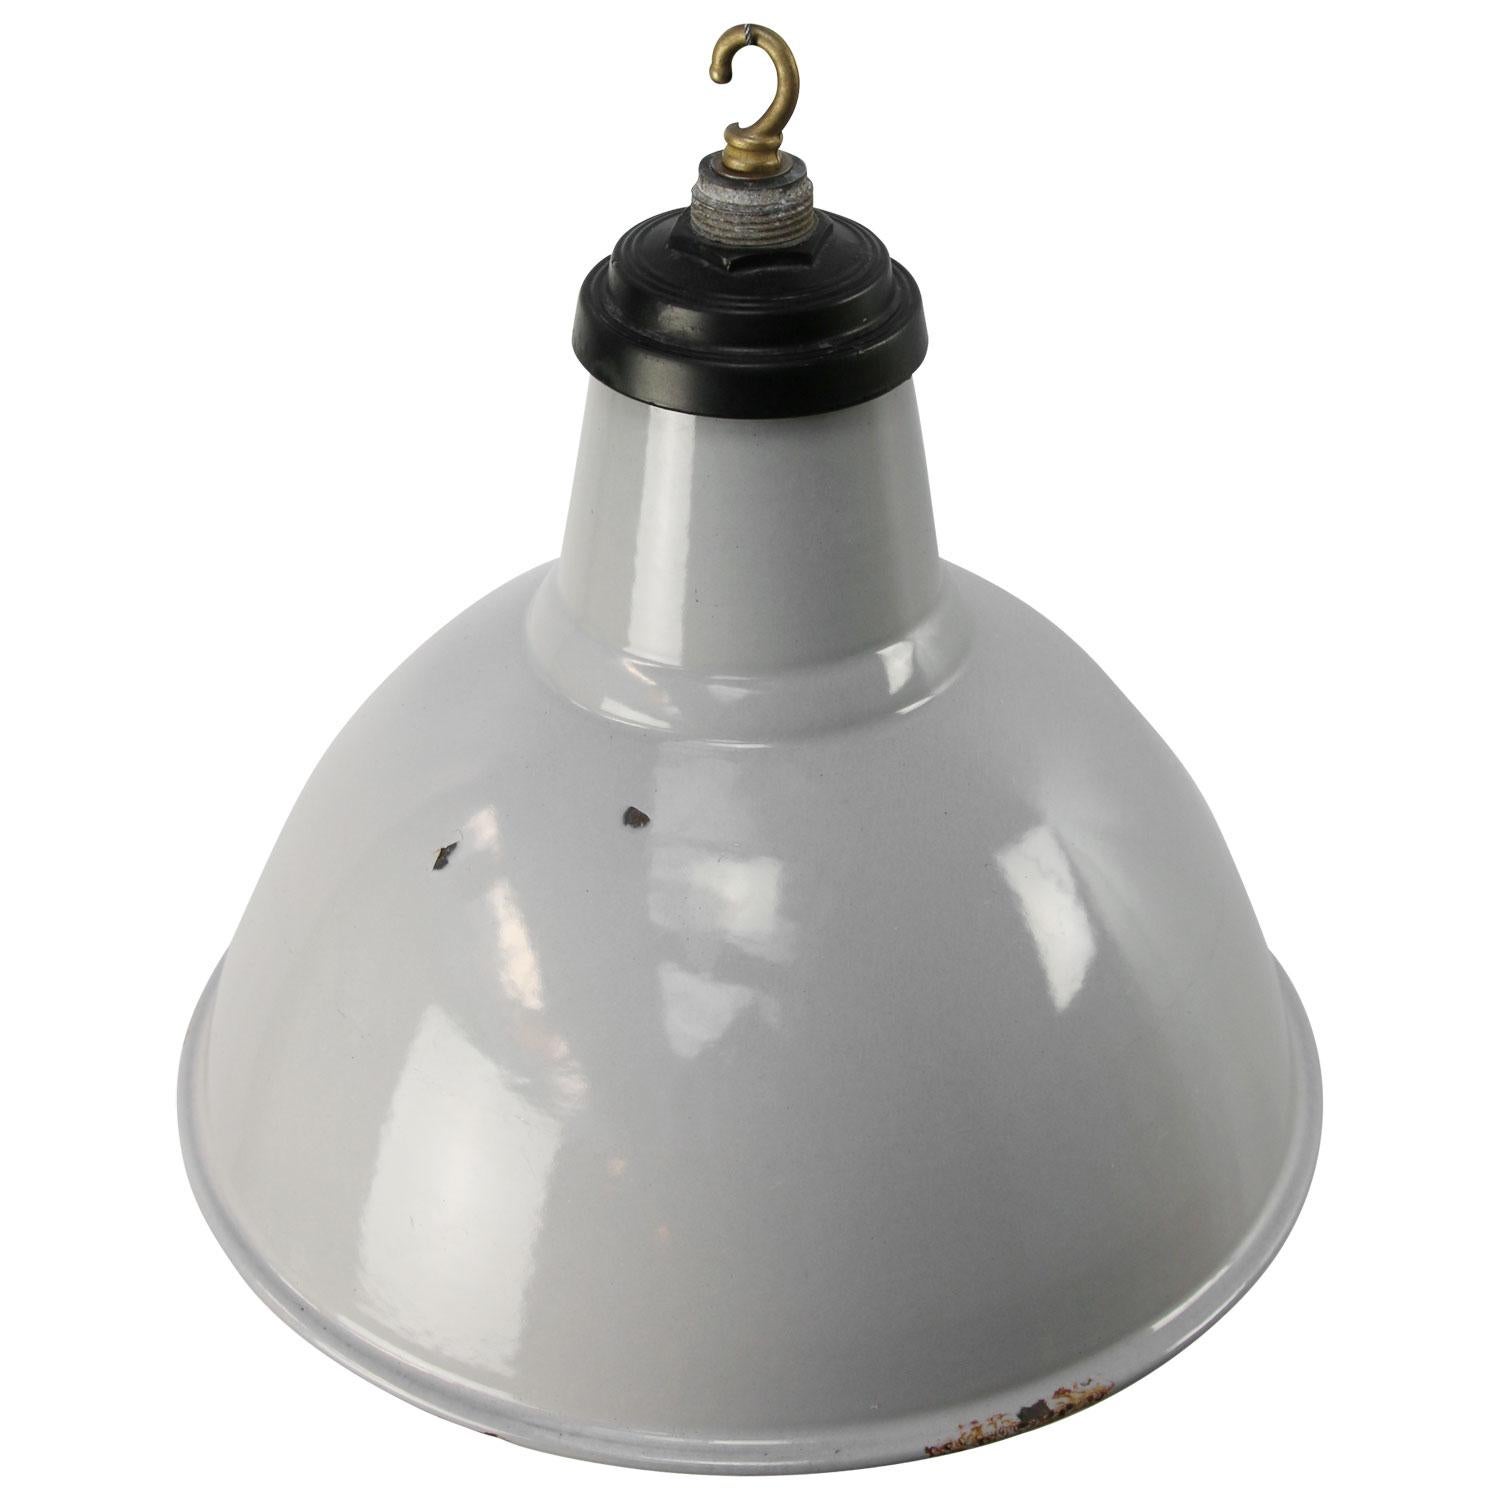 English vintage industrial Classic. Grey enamel white interior. 

Weight: 1.70 kg / 3.7 lb

Priced per individual item. All lamps have been made suitable by international standards for incandescent light bulbs, energy-efficient and LED bulbs.